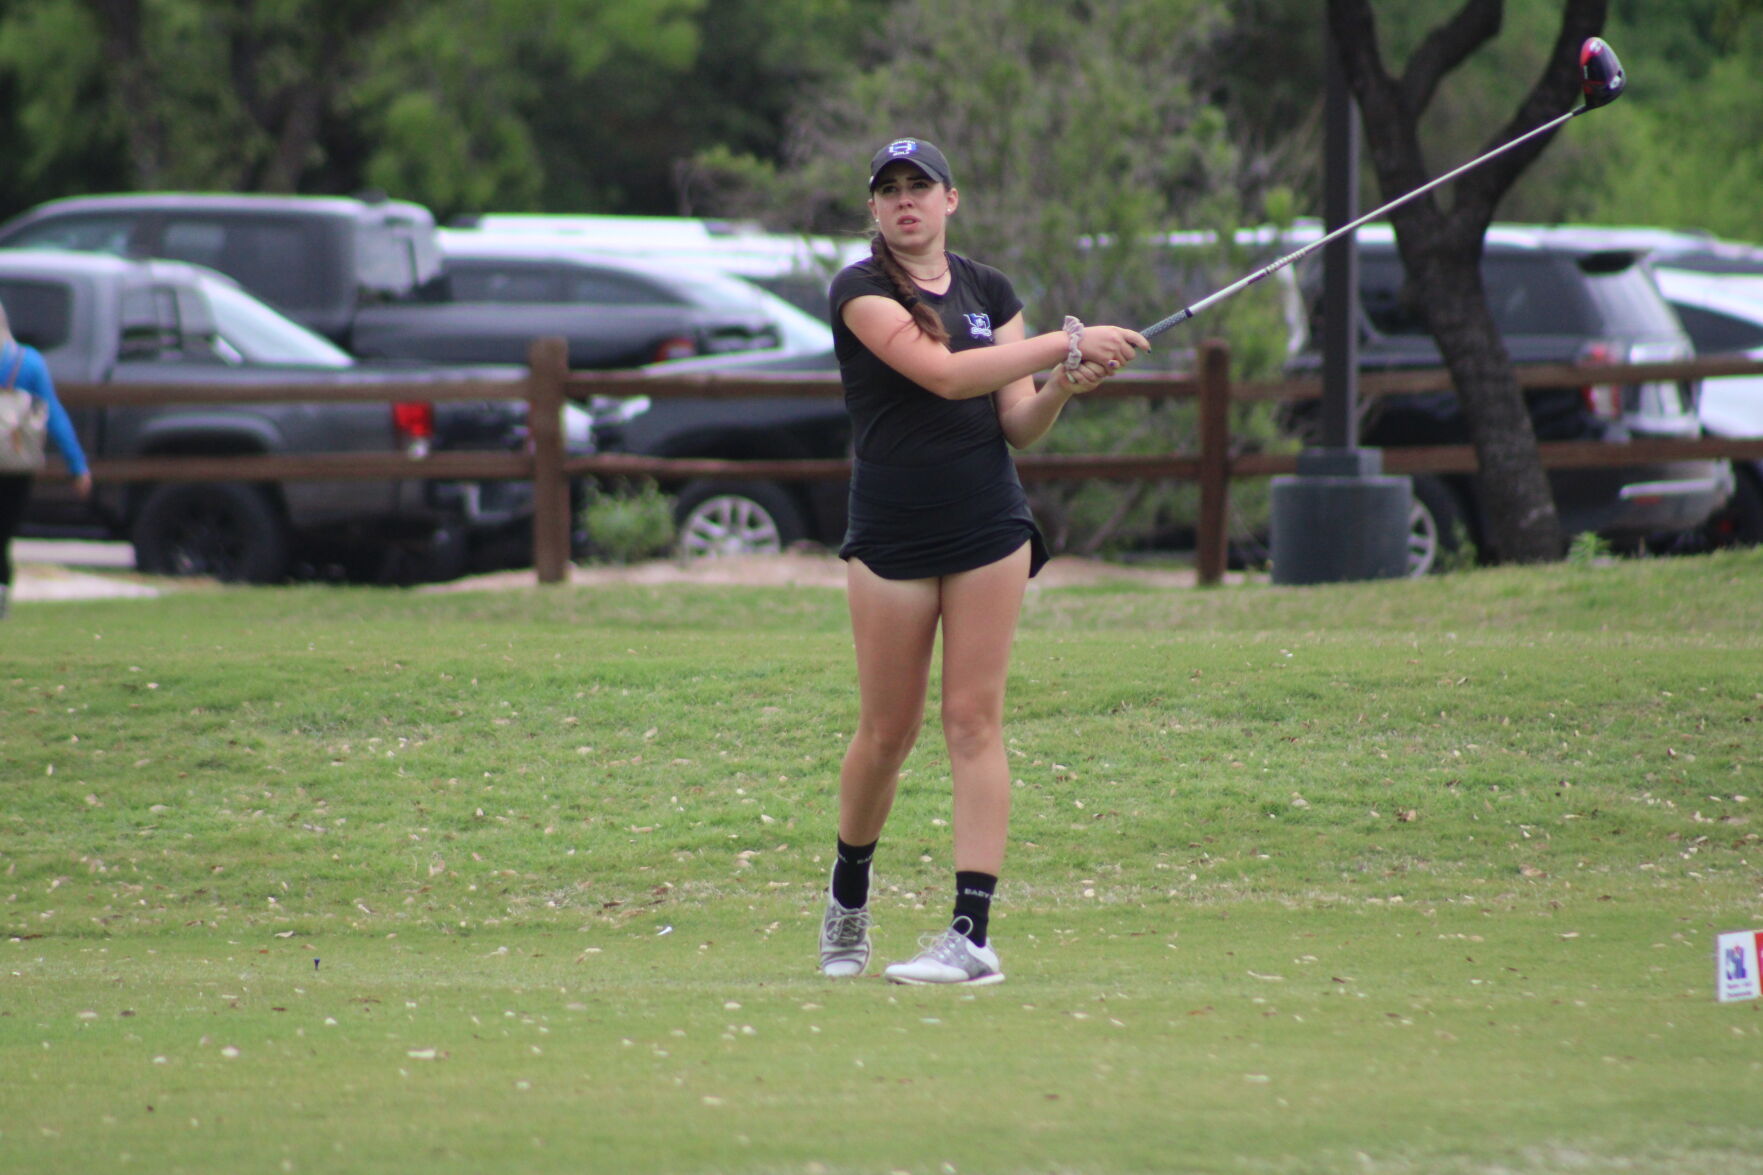 Hebron’s Stalee Fields wins regional golf title; Coppell, Flower Mound, Walnut Grove qualify for state